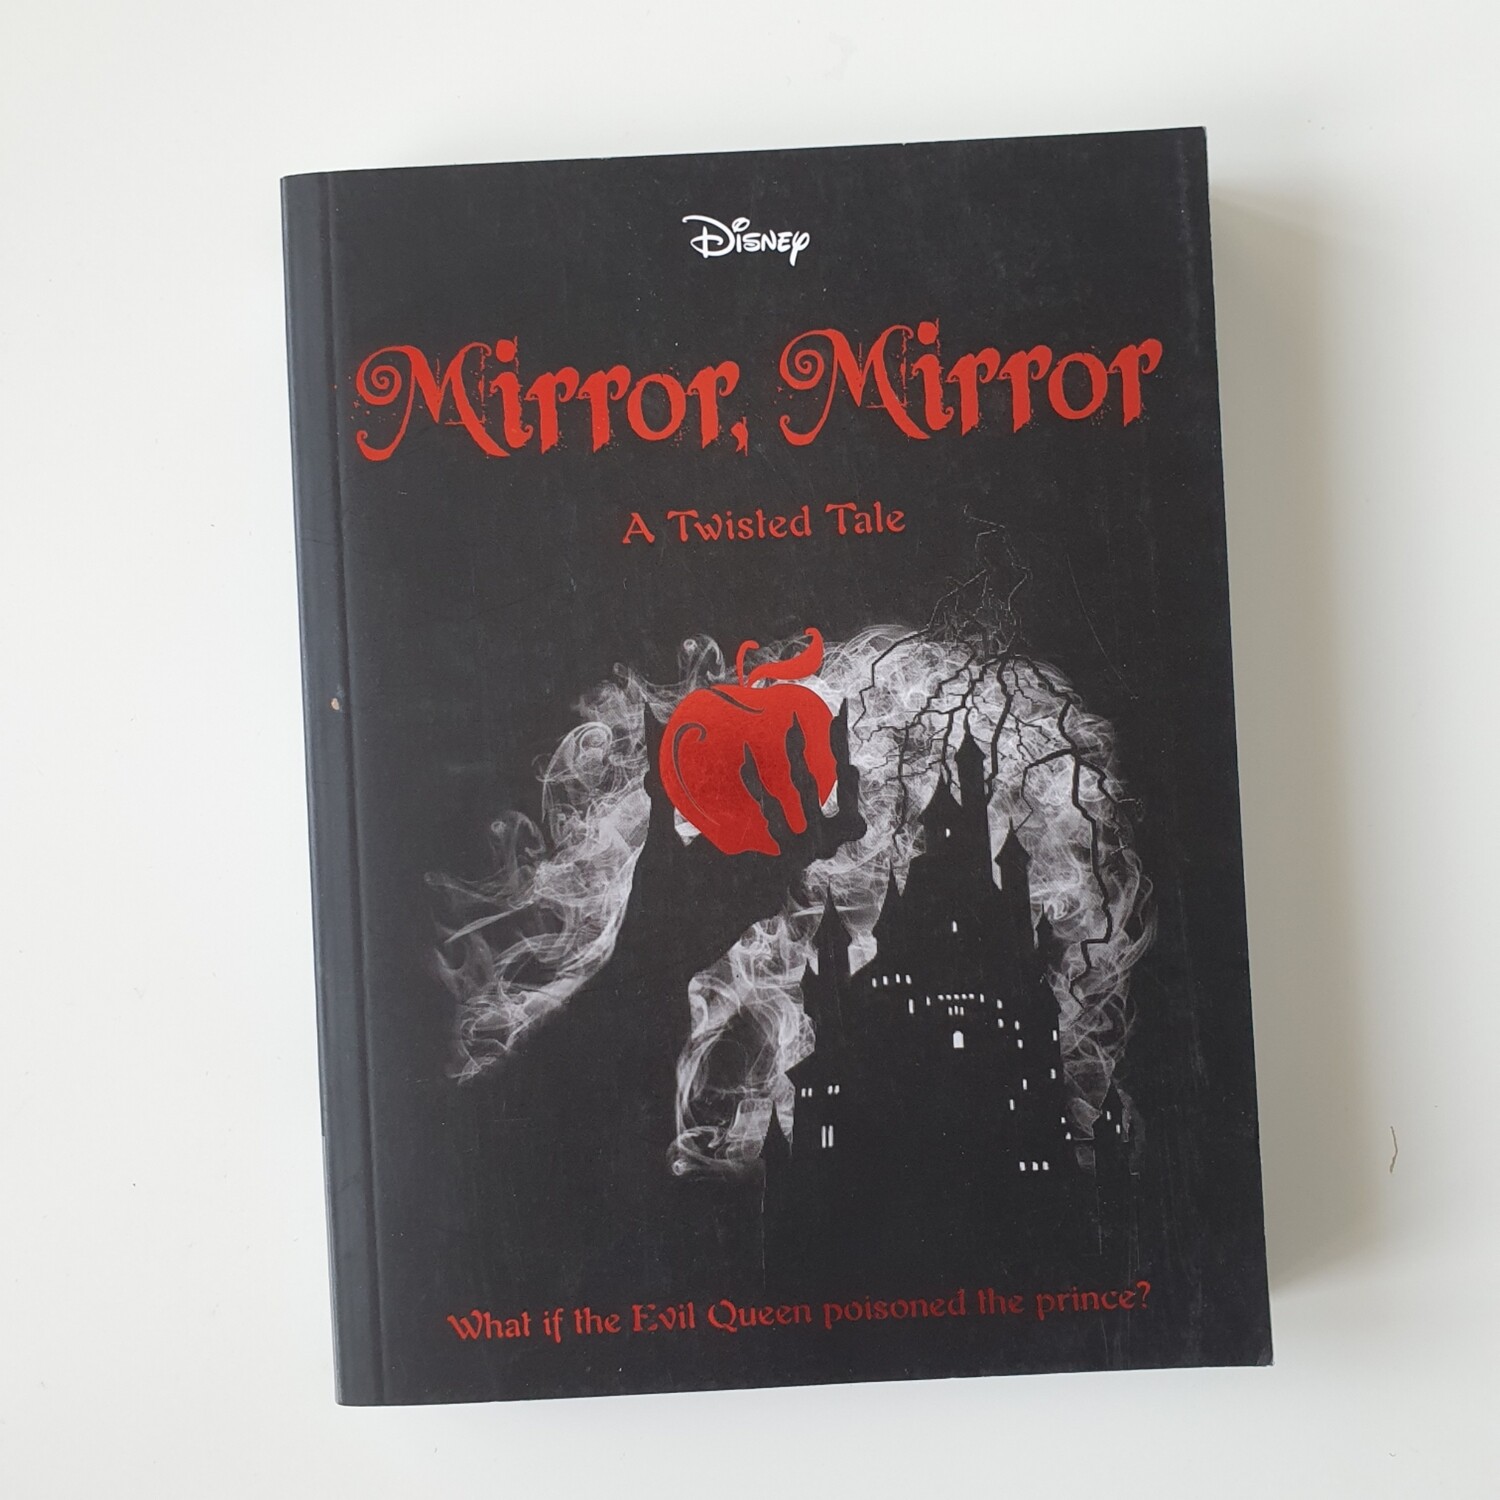 Snow White - Mirror Mirror - A Twisted Tale, Disney Notebook - made from a paperback book, comes with book corners